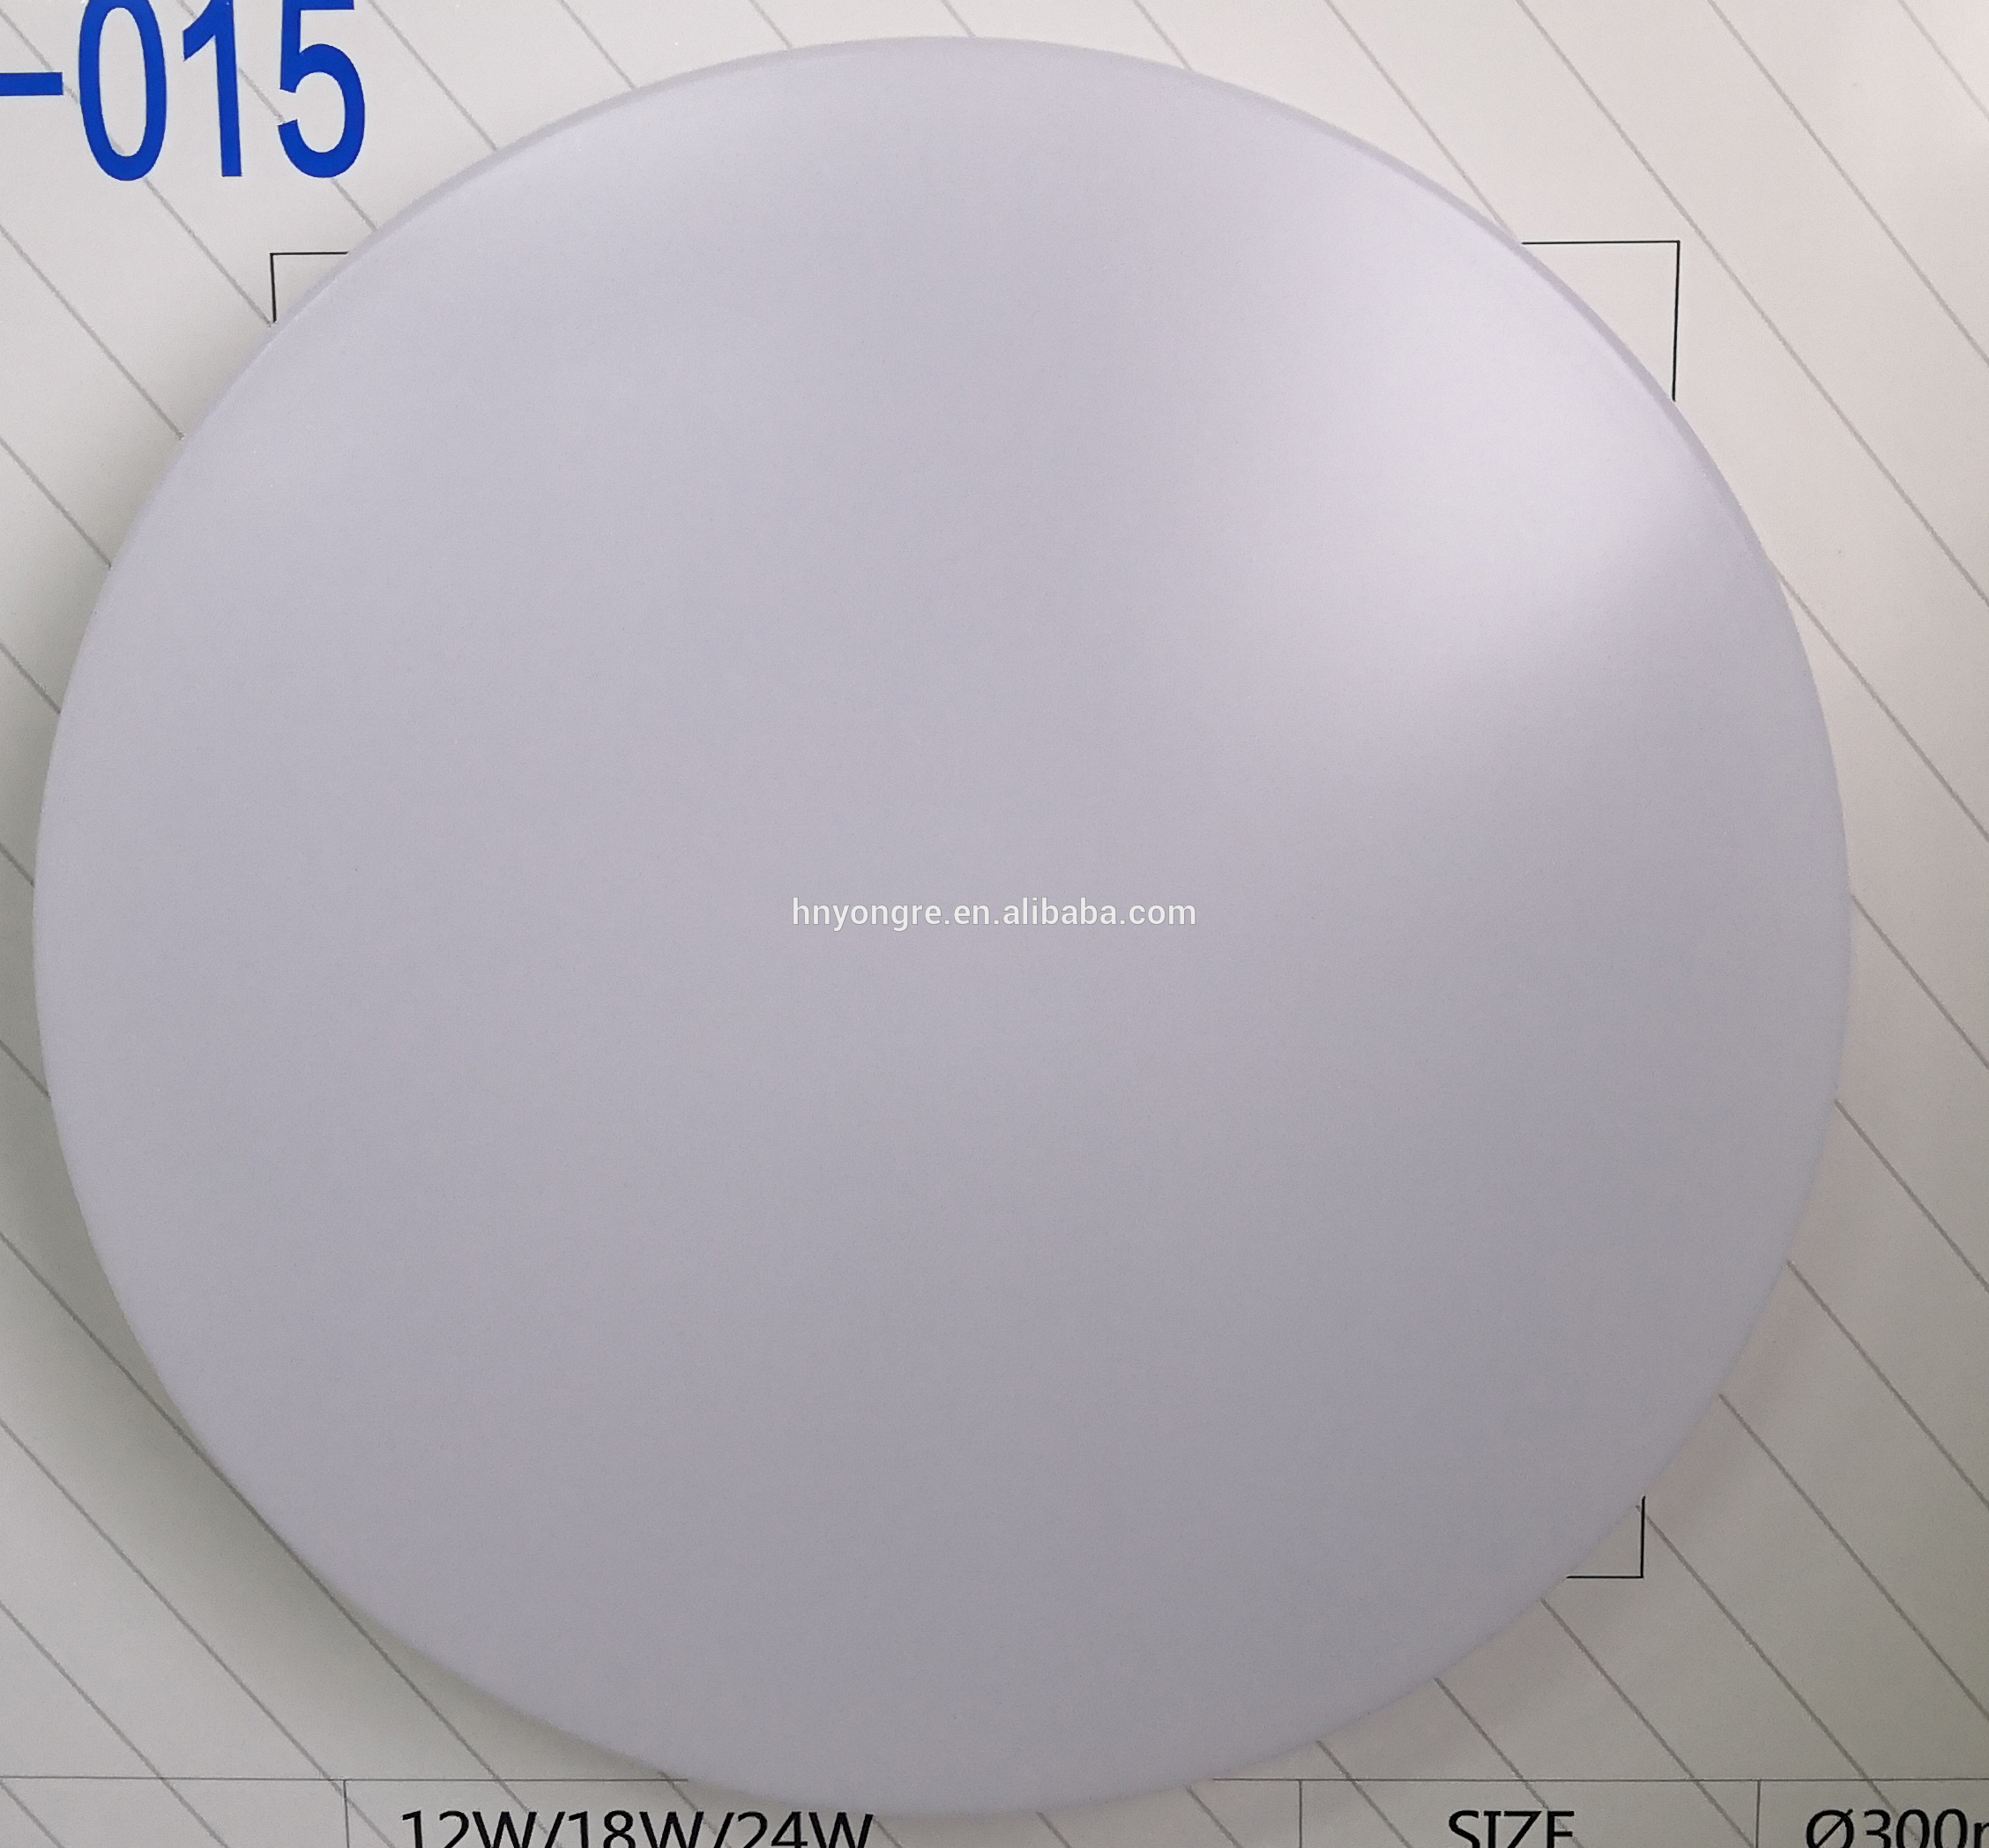 Surface Led ultra-thin ceiling lamp round 50X50,60X60 60w 4800lm pf>0.9 ce /rohs CCT+RGB